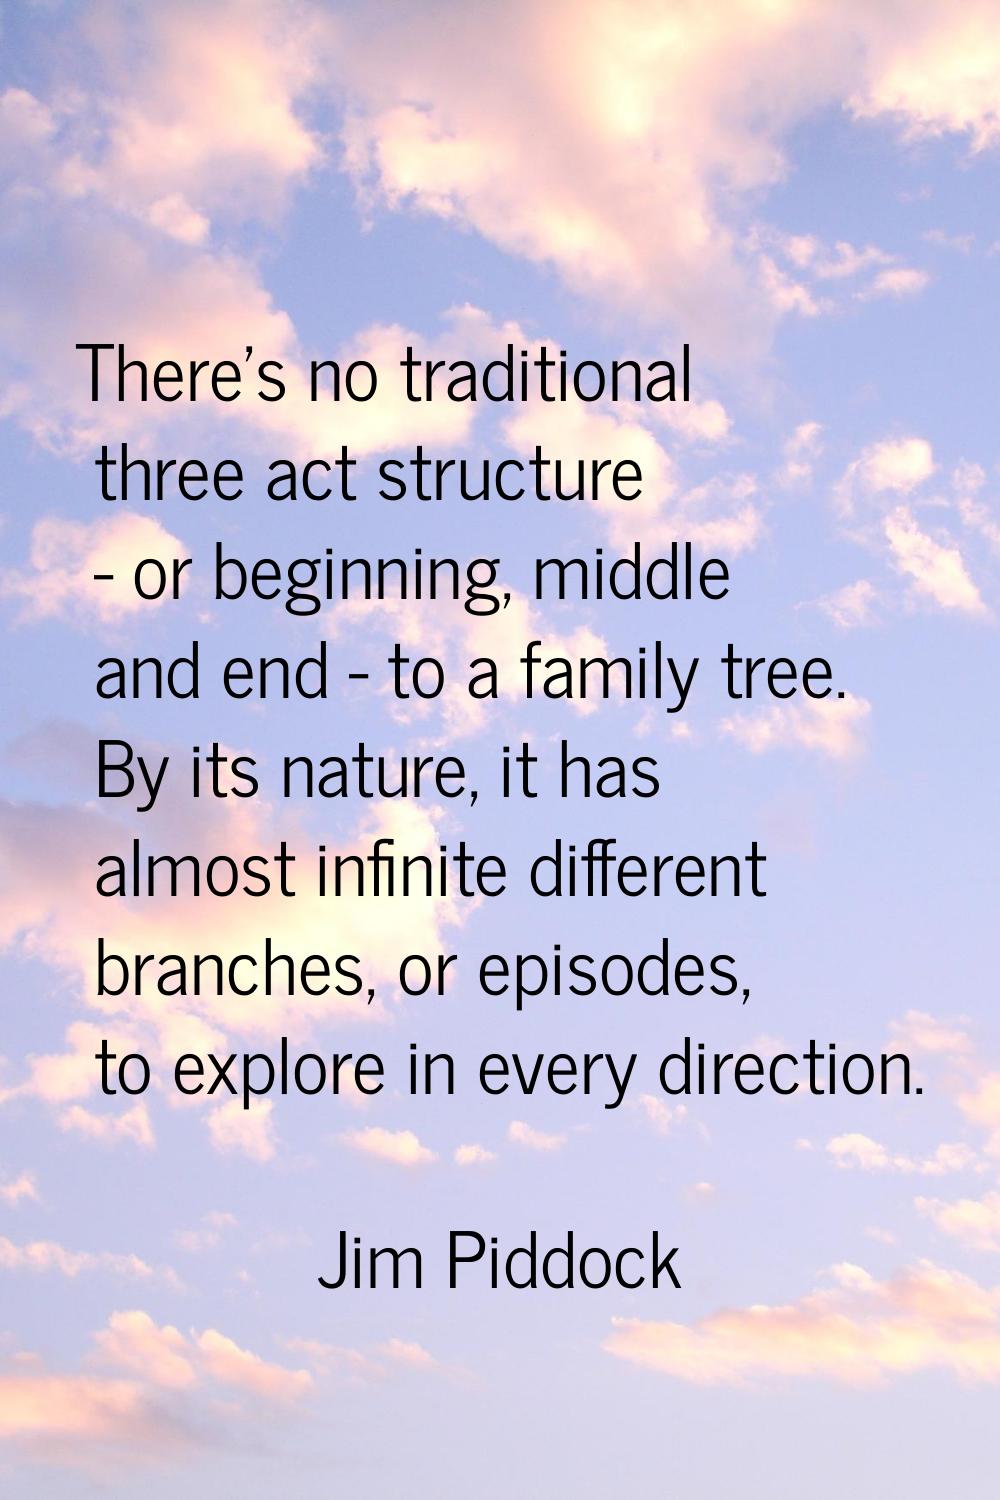 There's no traditional three act structure - or beginning, middle and end - to a family tree. By it